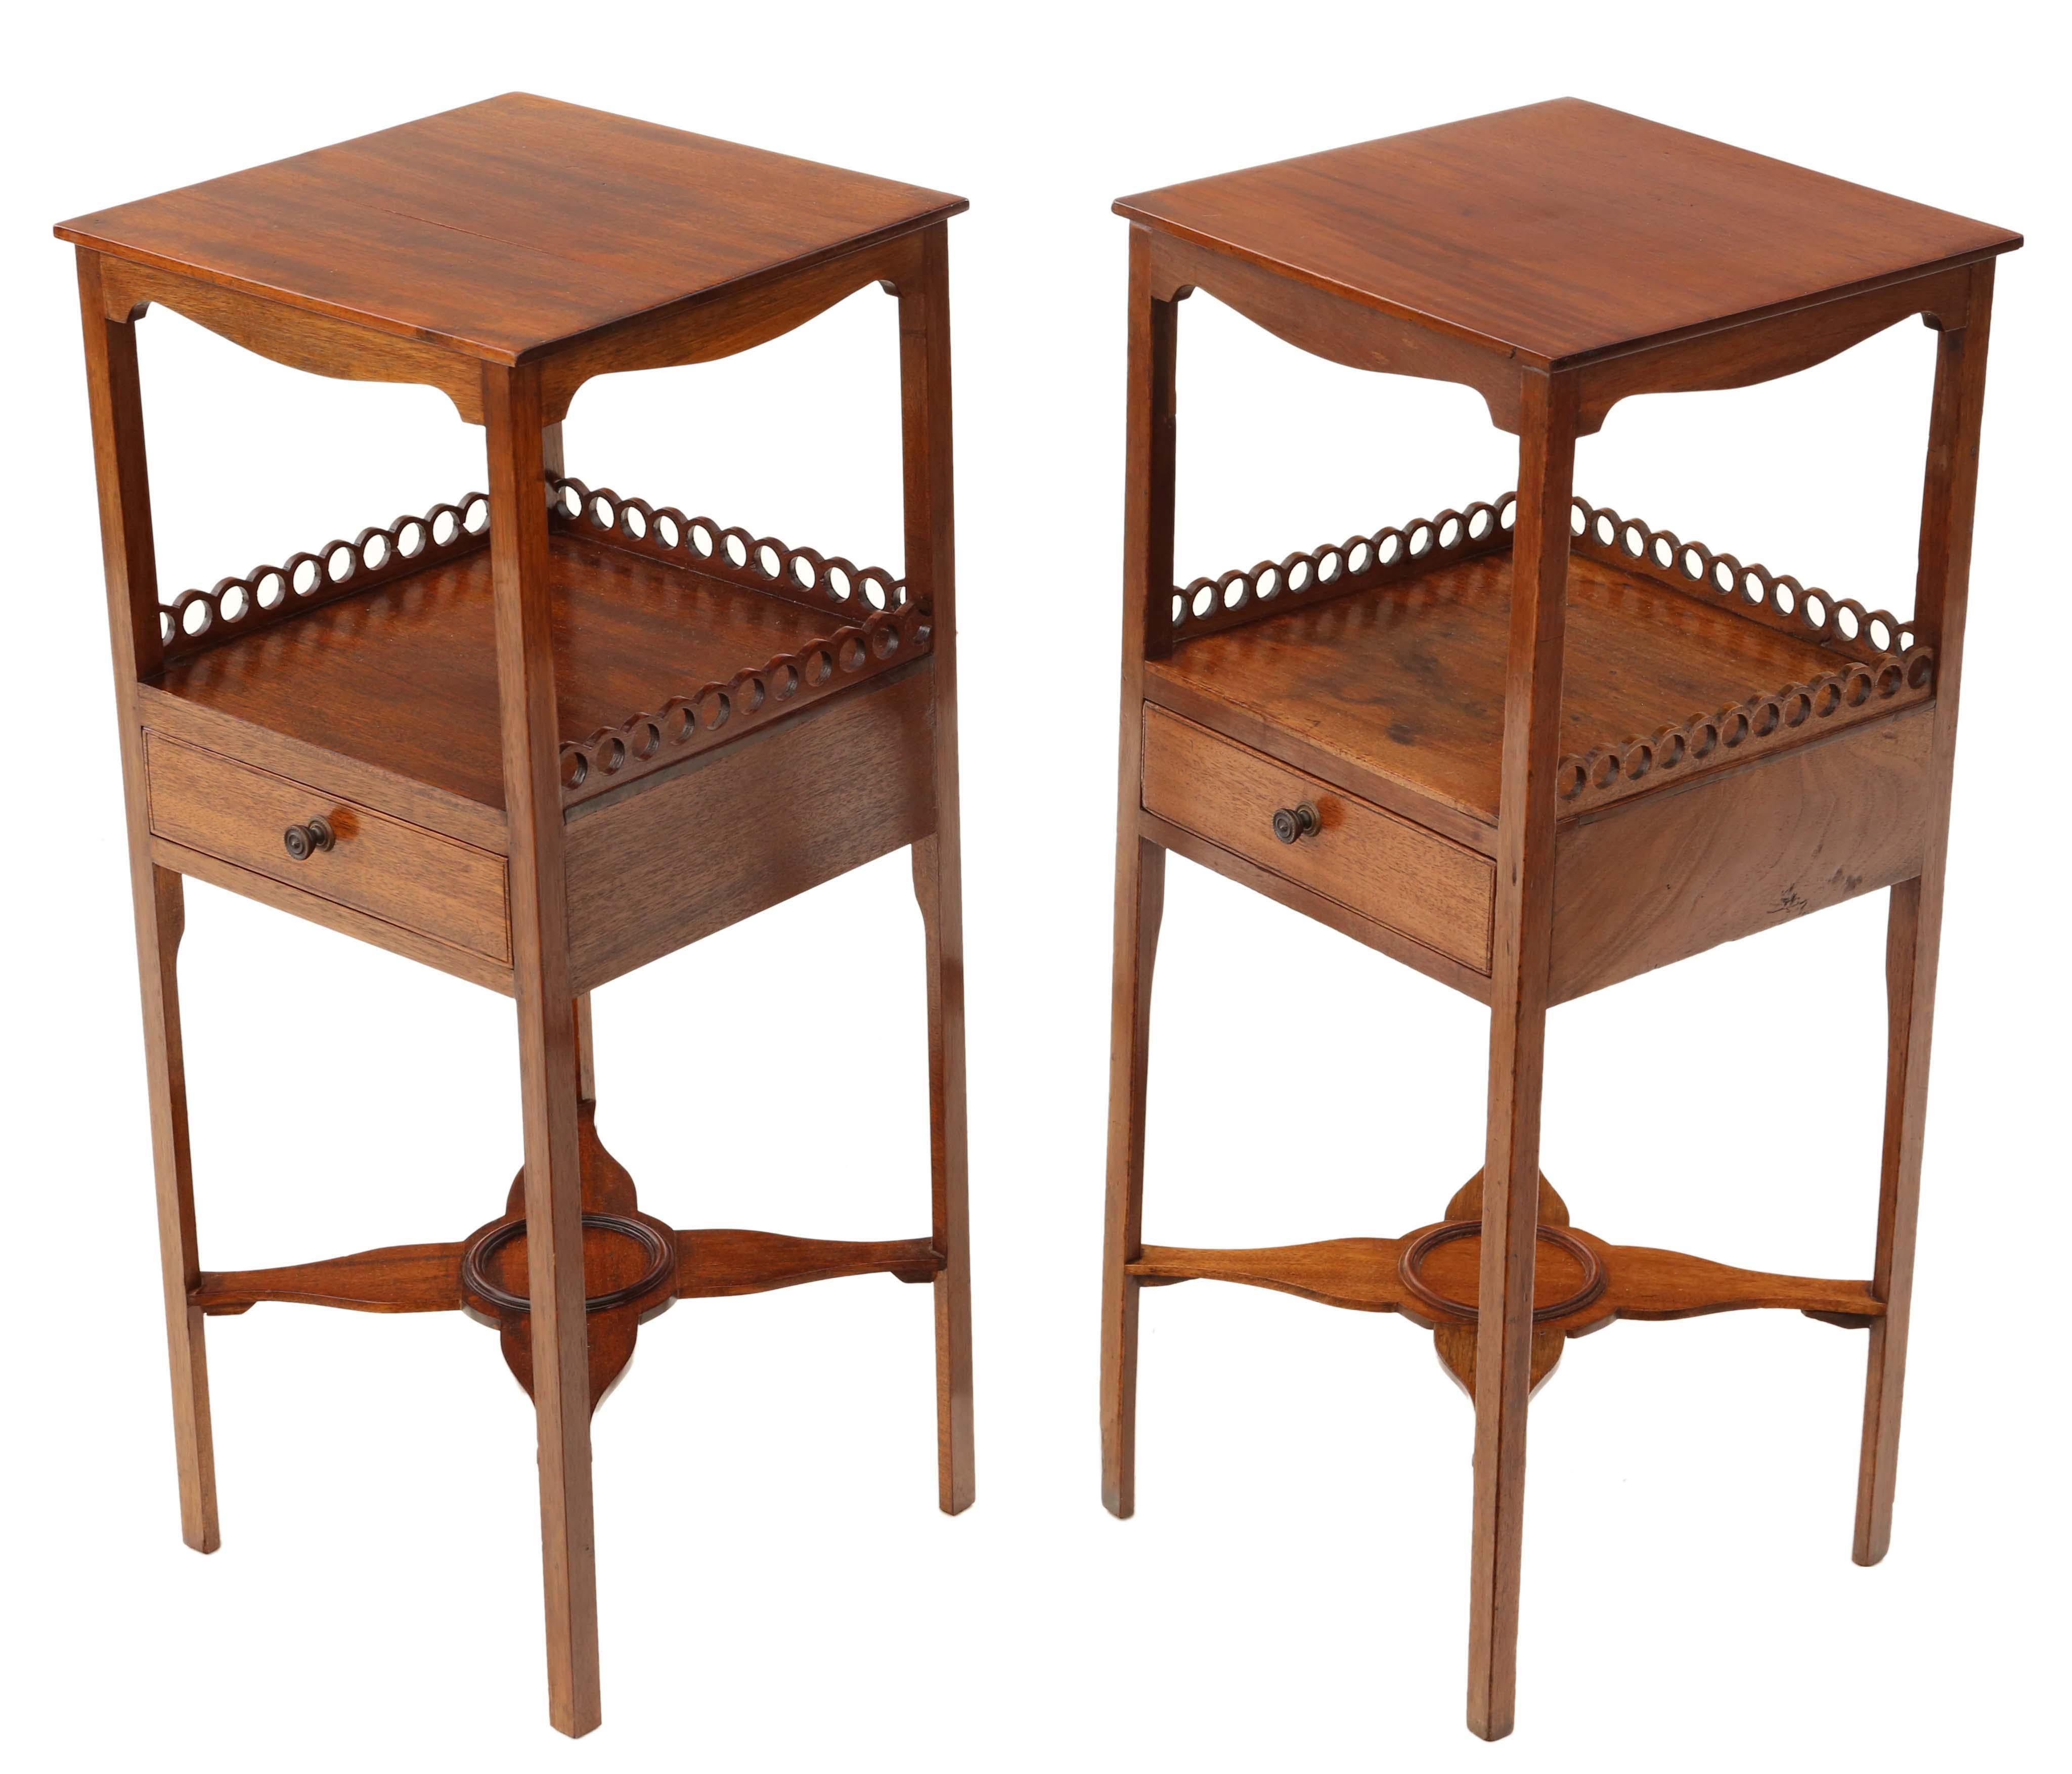 Antique fine quality pair of Georgian early 19th Century mahogany bedside tables